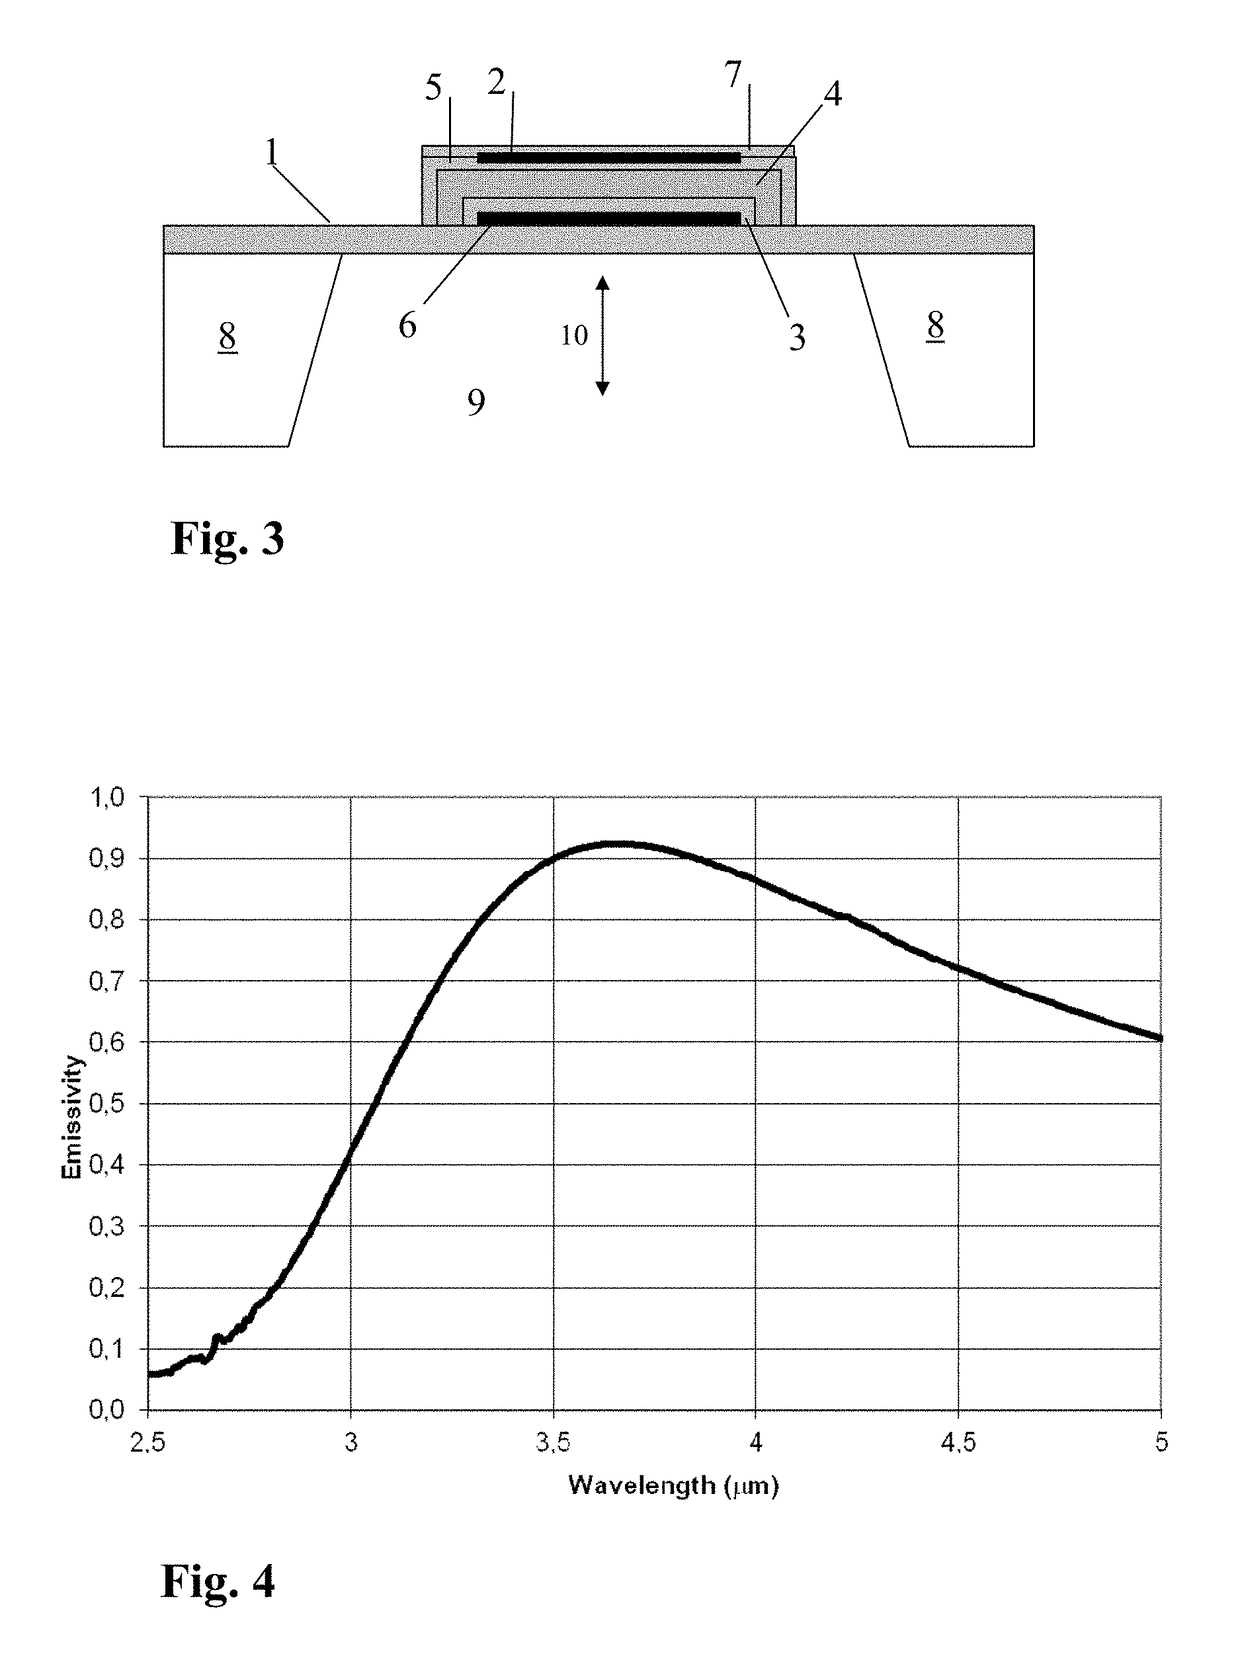 Layered structure for an infrared emitter, infrared emitter device and detector